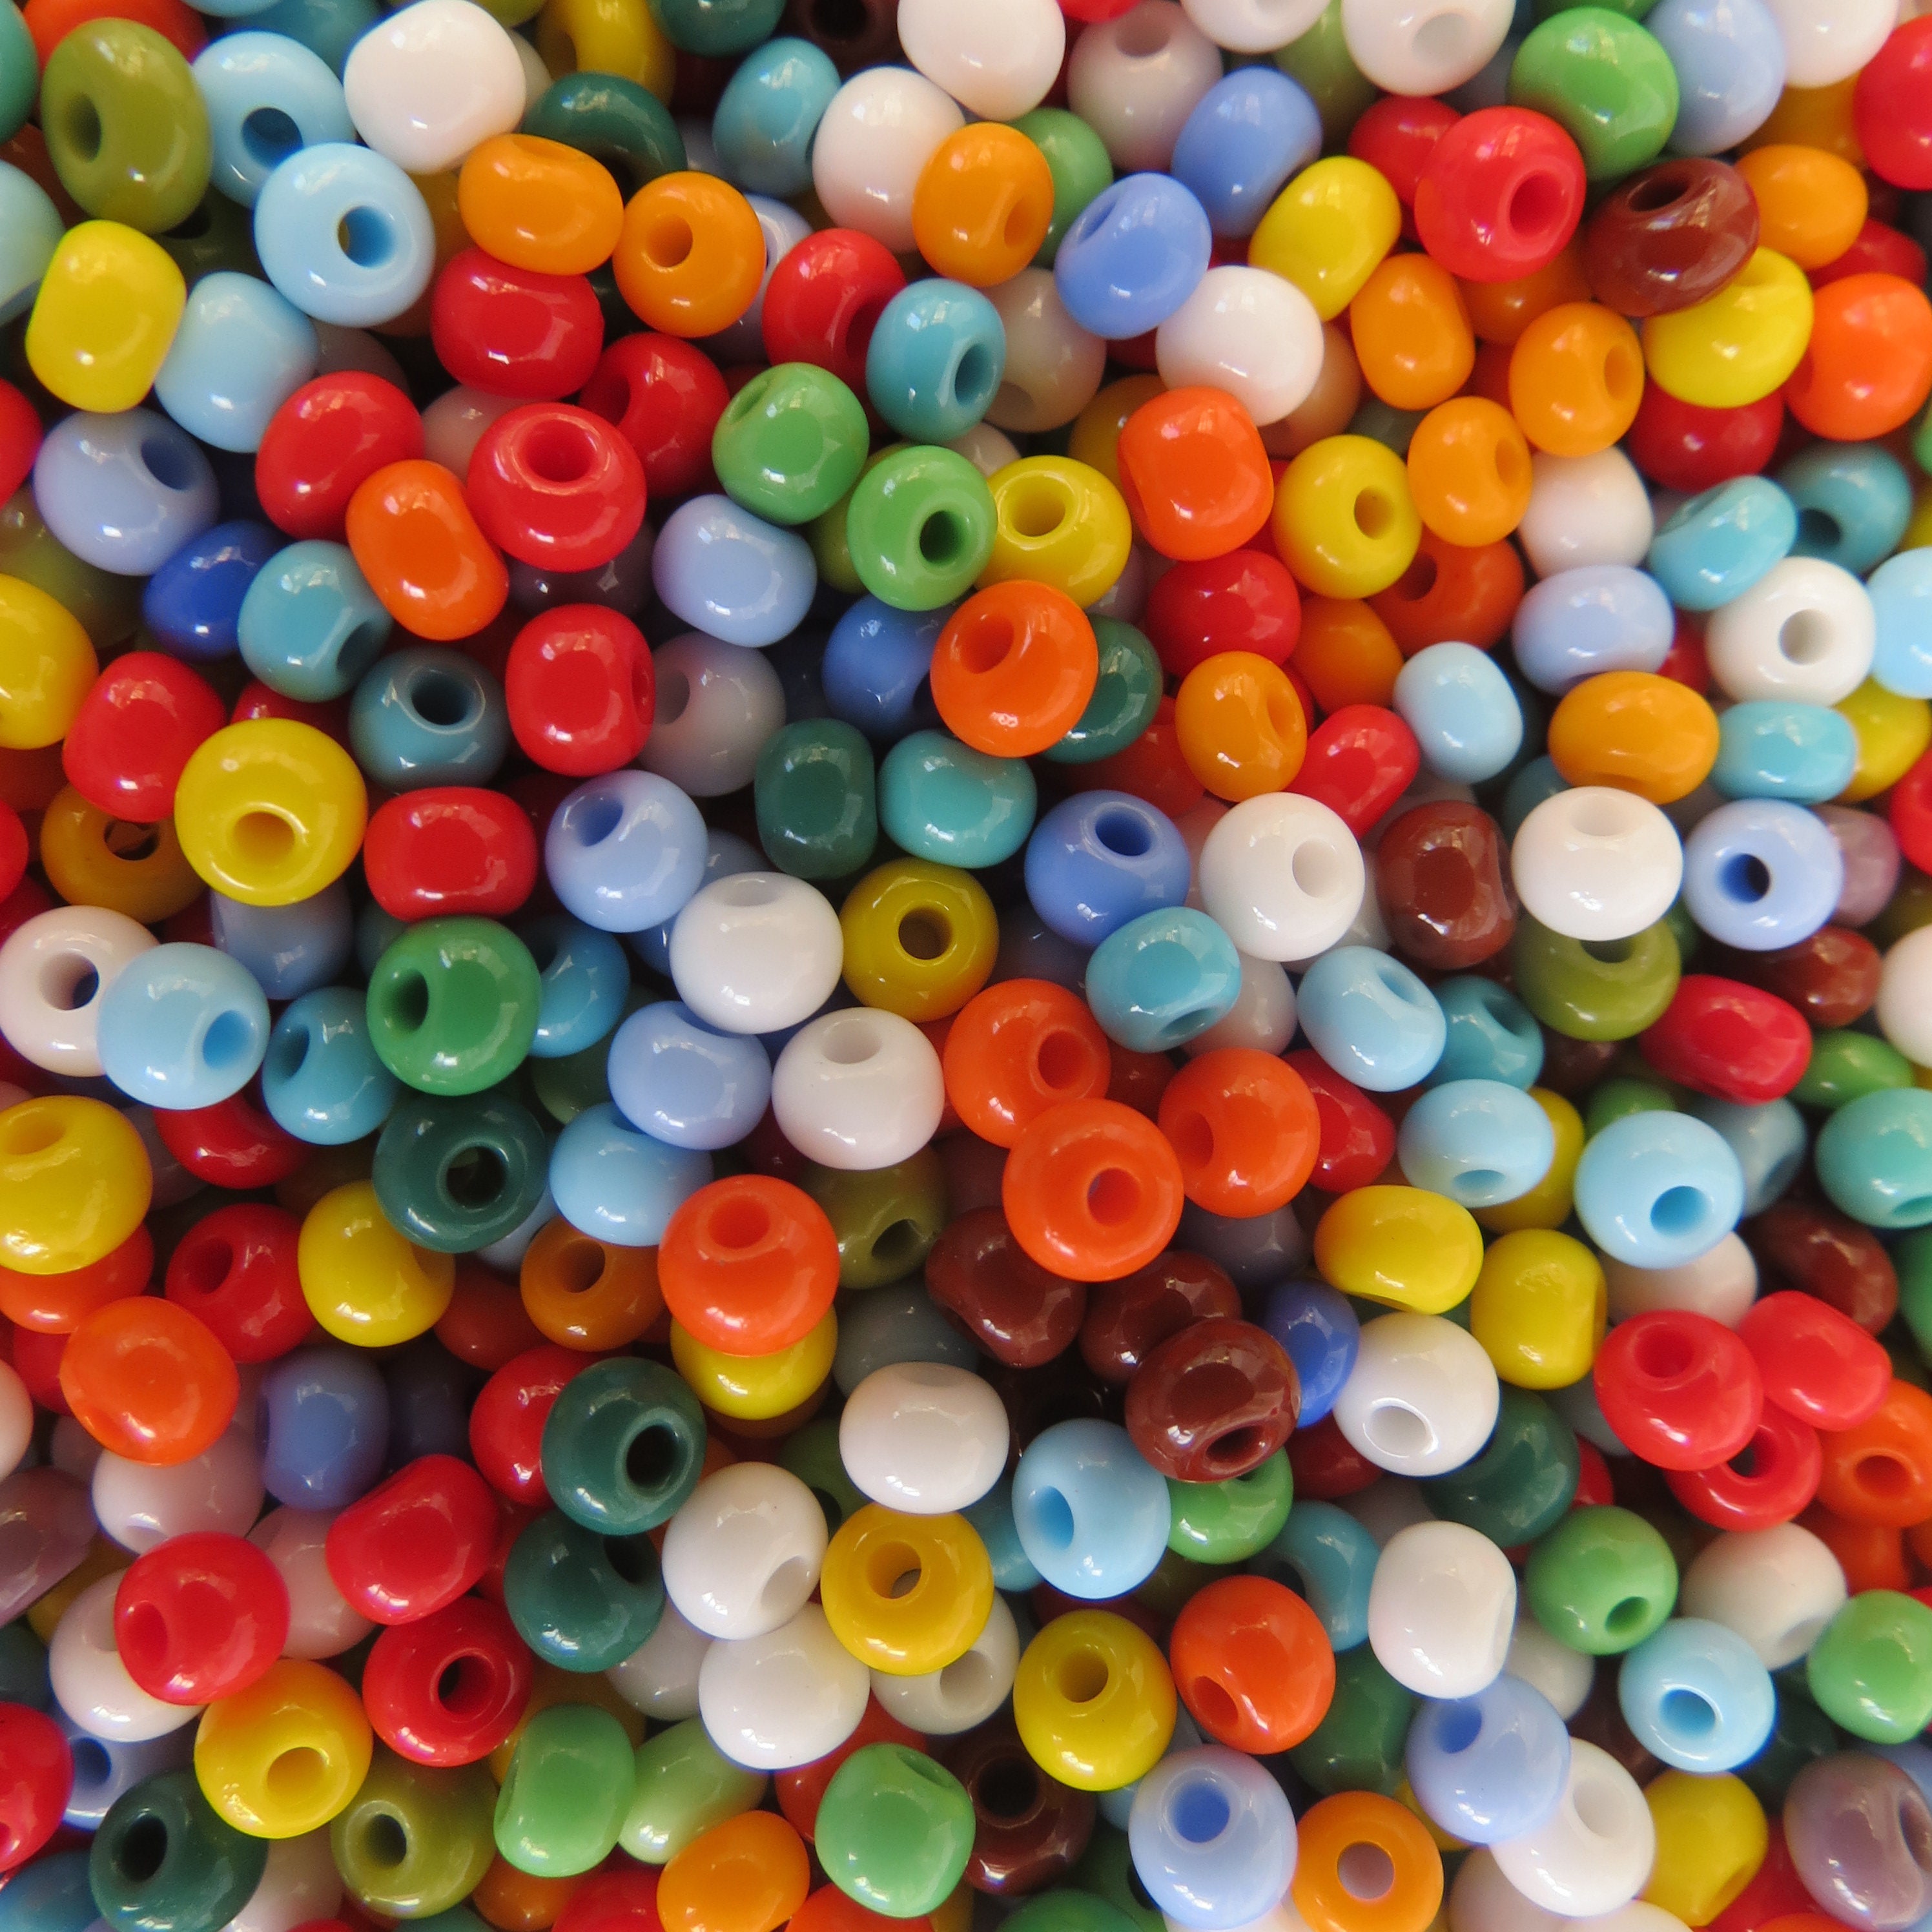 Candy Spacer Beads, Cute Acrylic Bead Mix for Jewelry Making, Bulk Bea